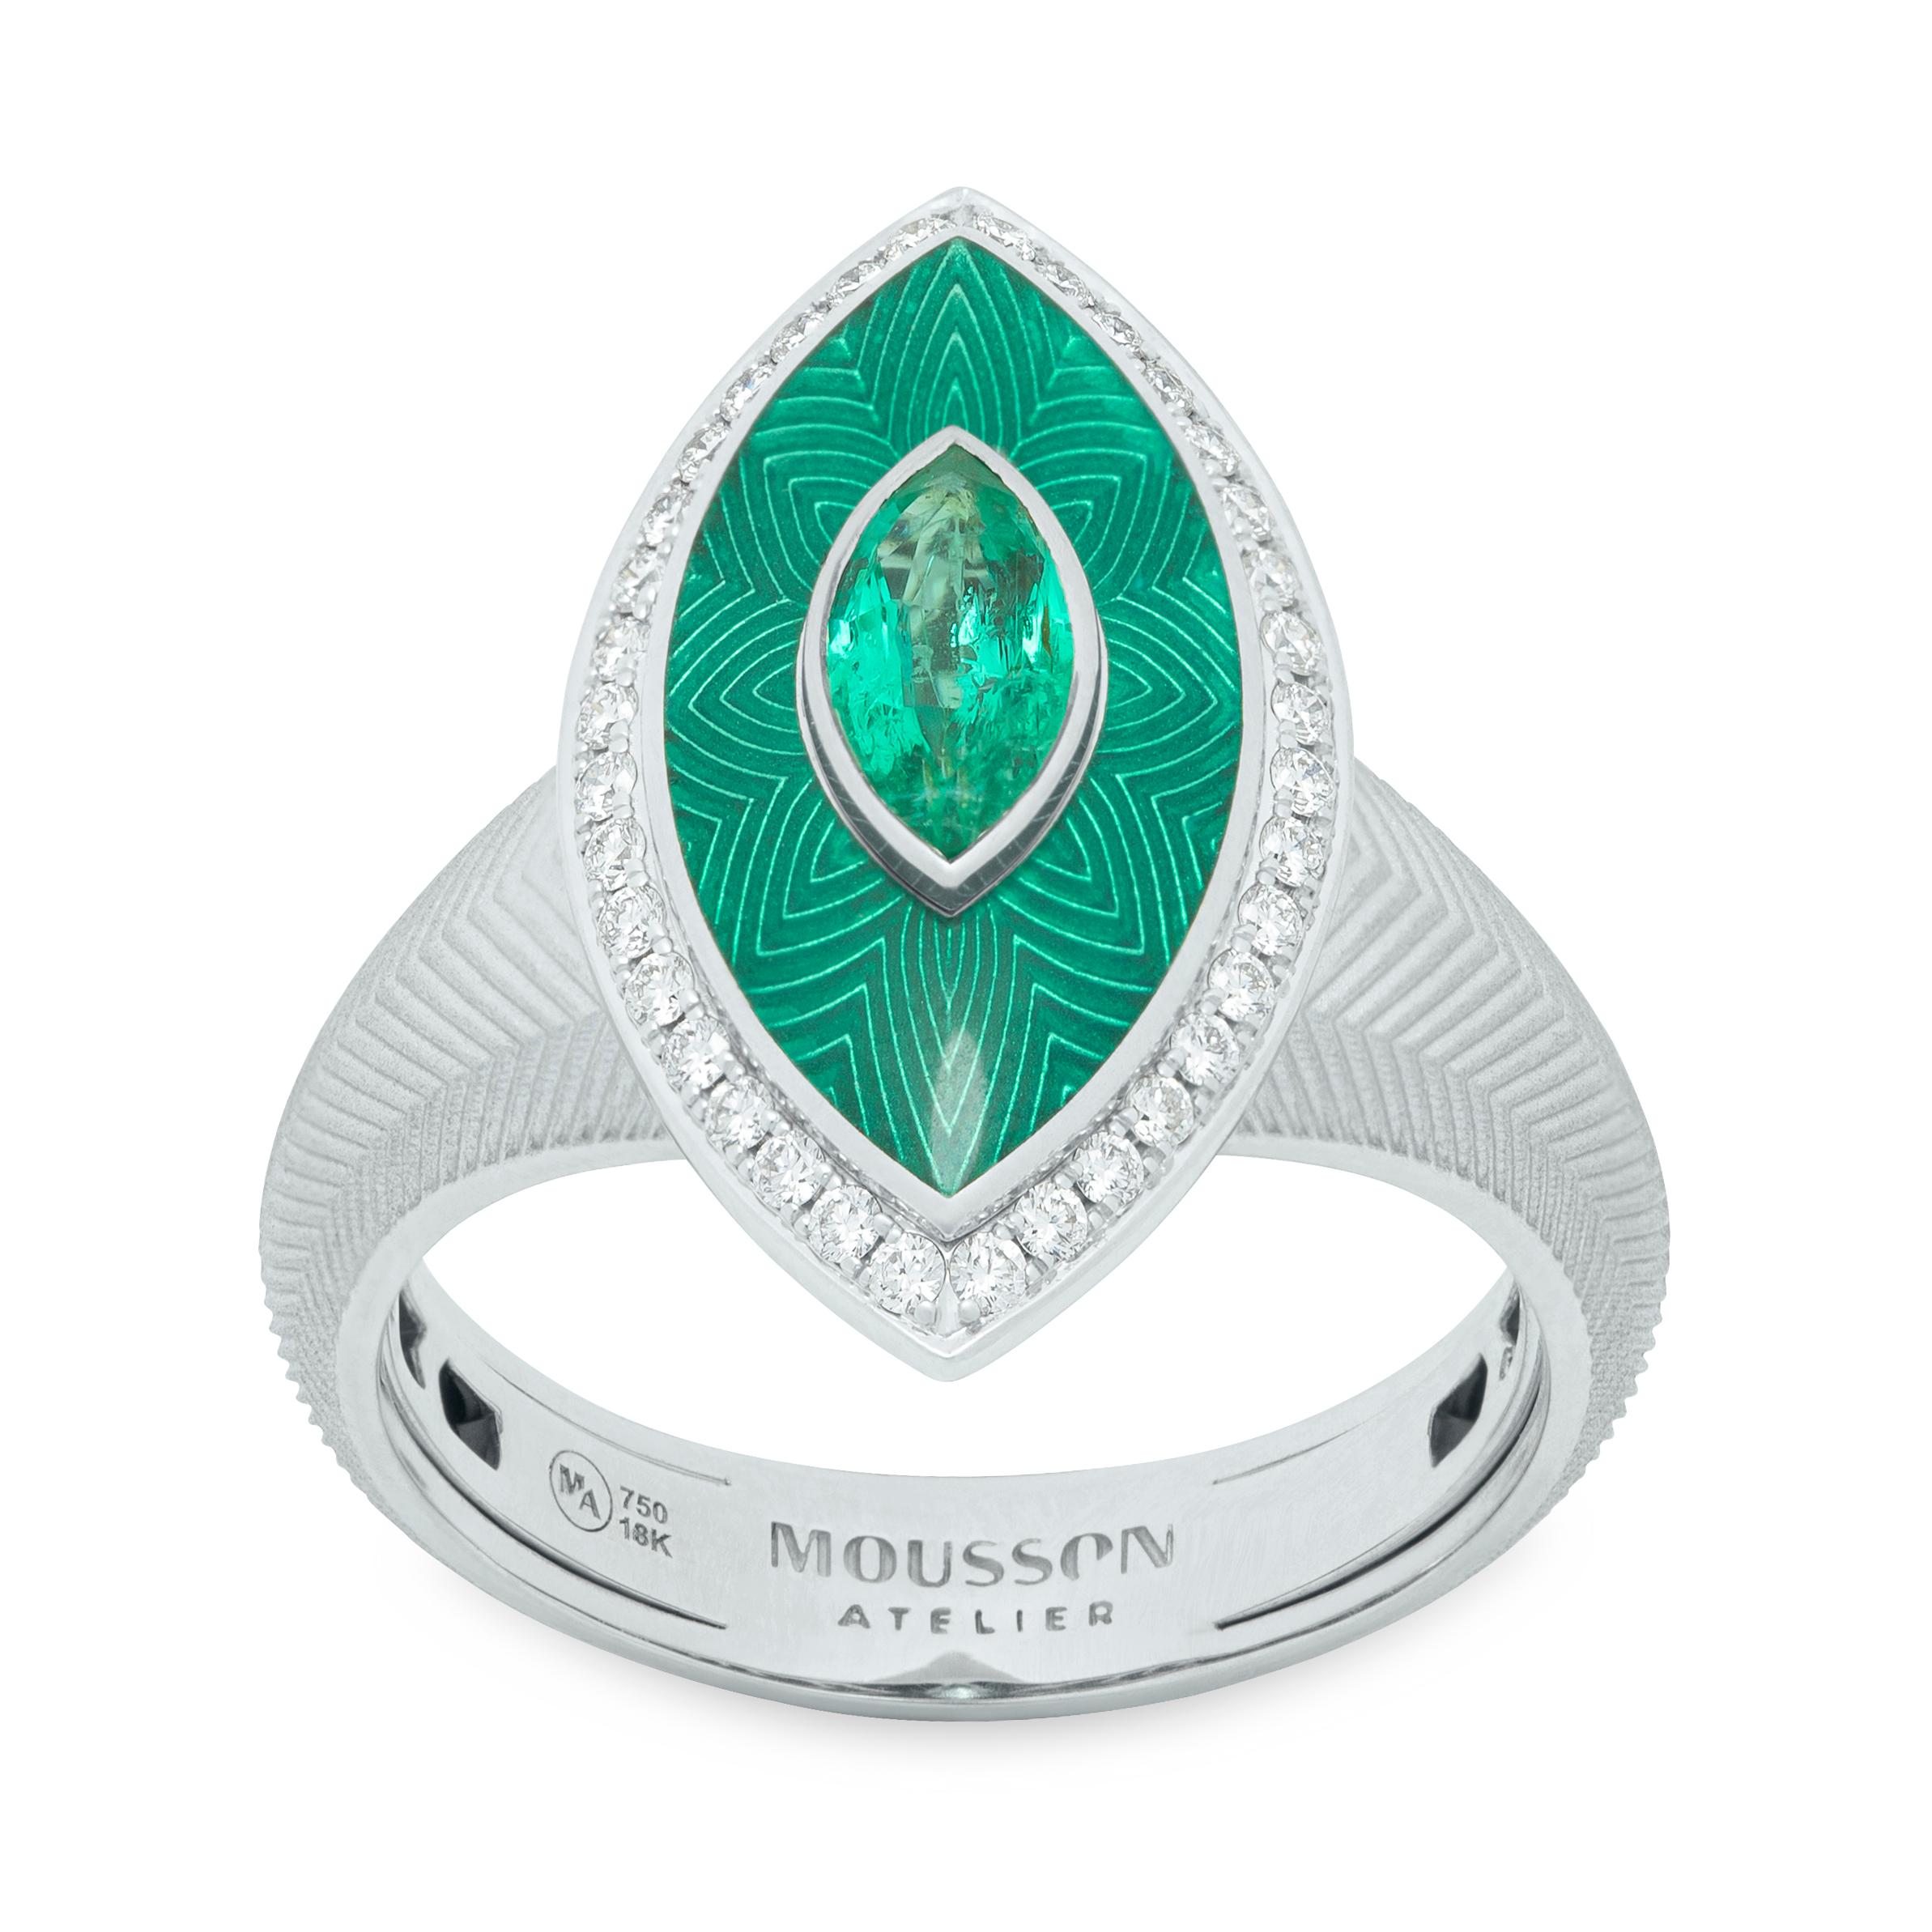 Emeralds Diamonds 18 Karat White Gold Tweed Marquise Suite
What we presented to you is the Suite from our famous Tweed collection. But it was made in an unusual form of a marquise. Incredibly beautiful green shades of central stones Emeralds and